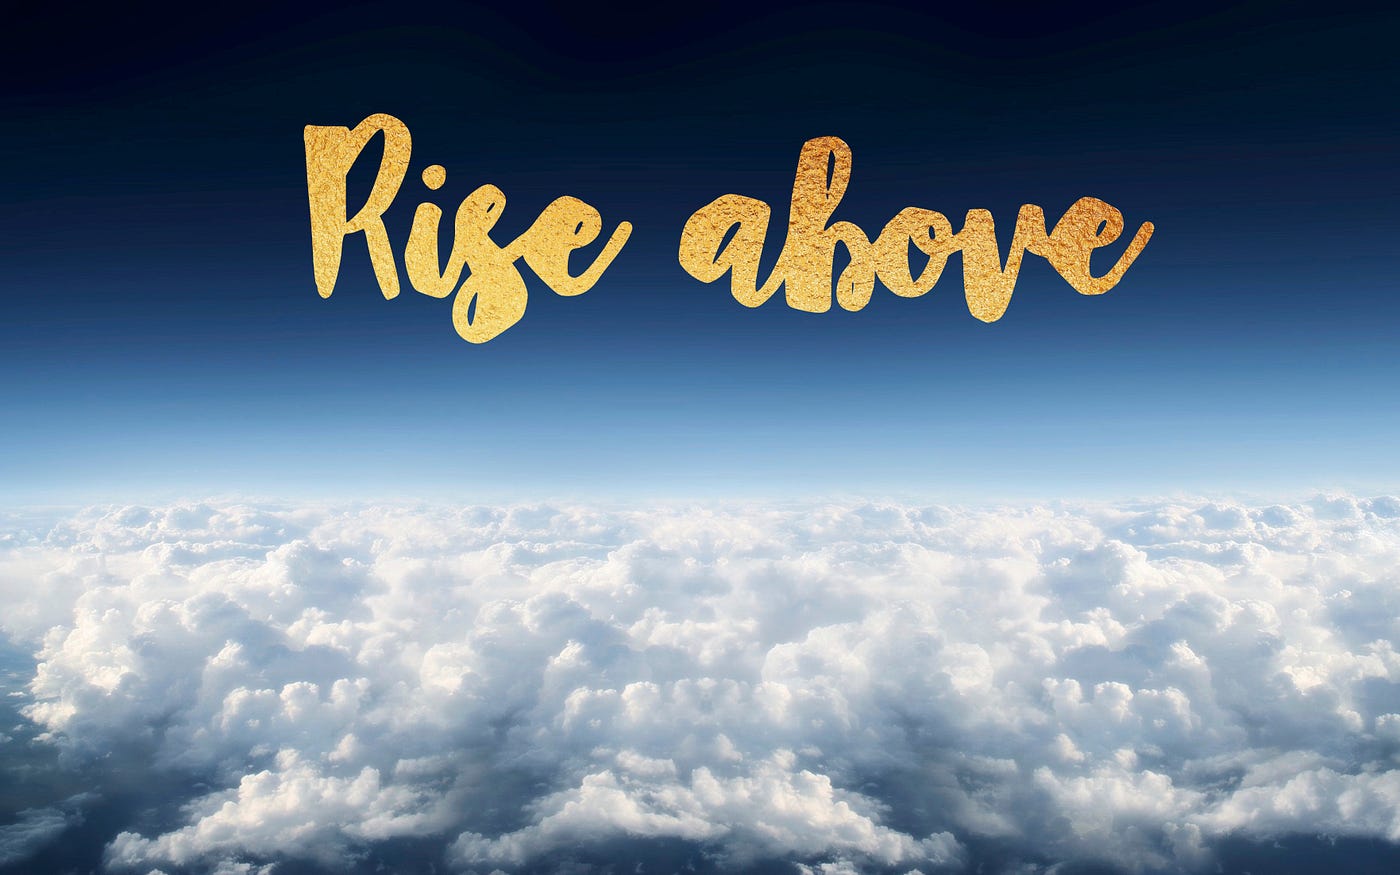 Rise aBove [Wallpaper design #1]. I made this wallpaper when I was trying…, by Sheeps are white cows